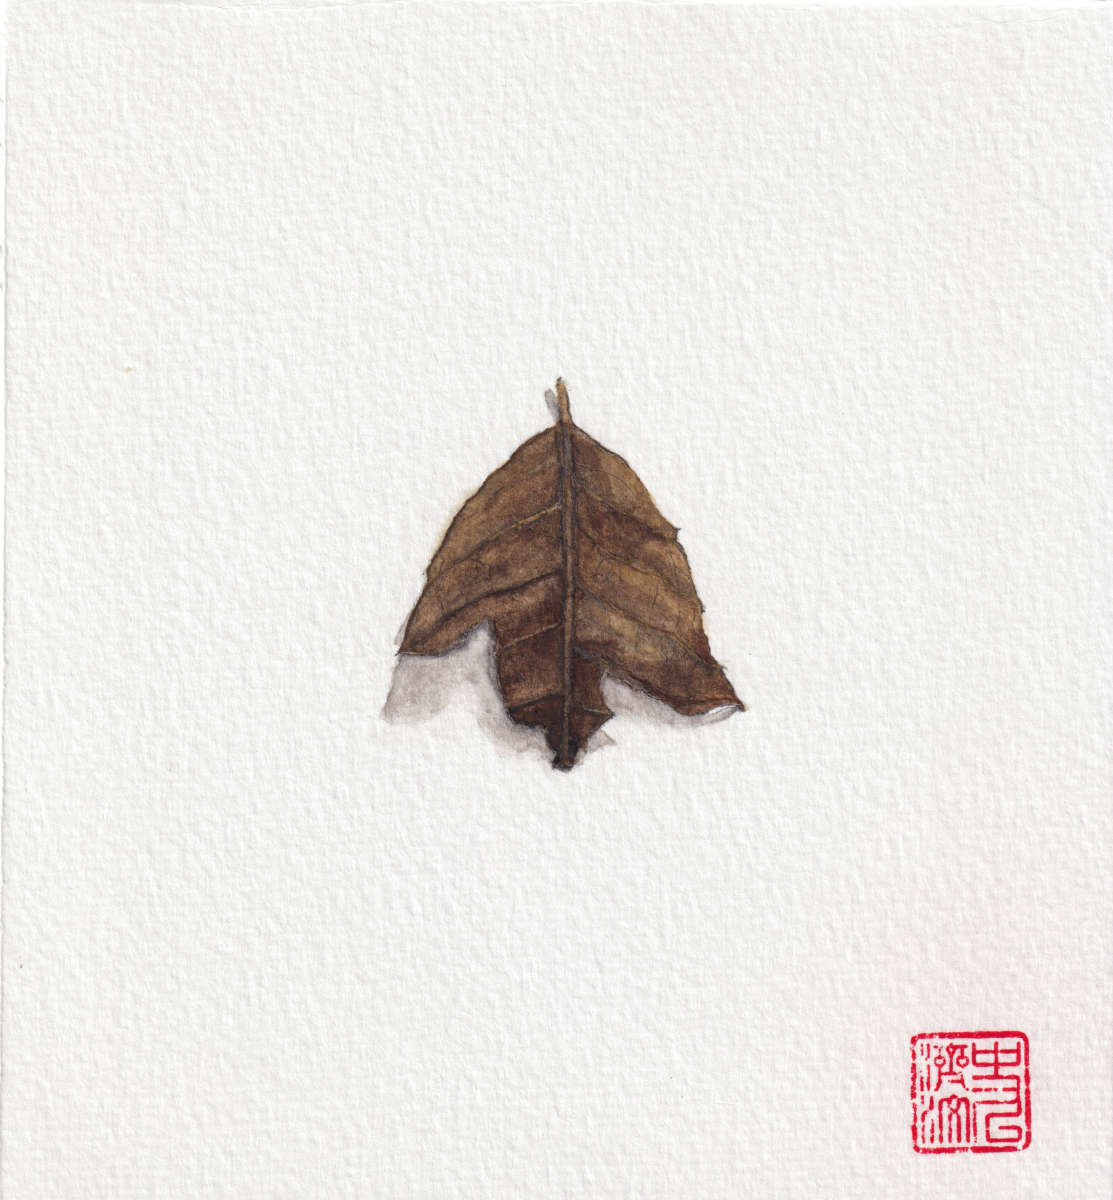 Singed Leaf Fragment. watercolor and pencil illustration